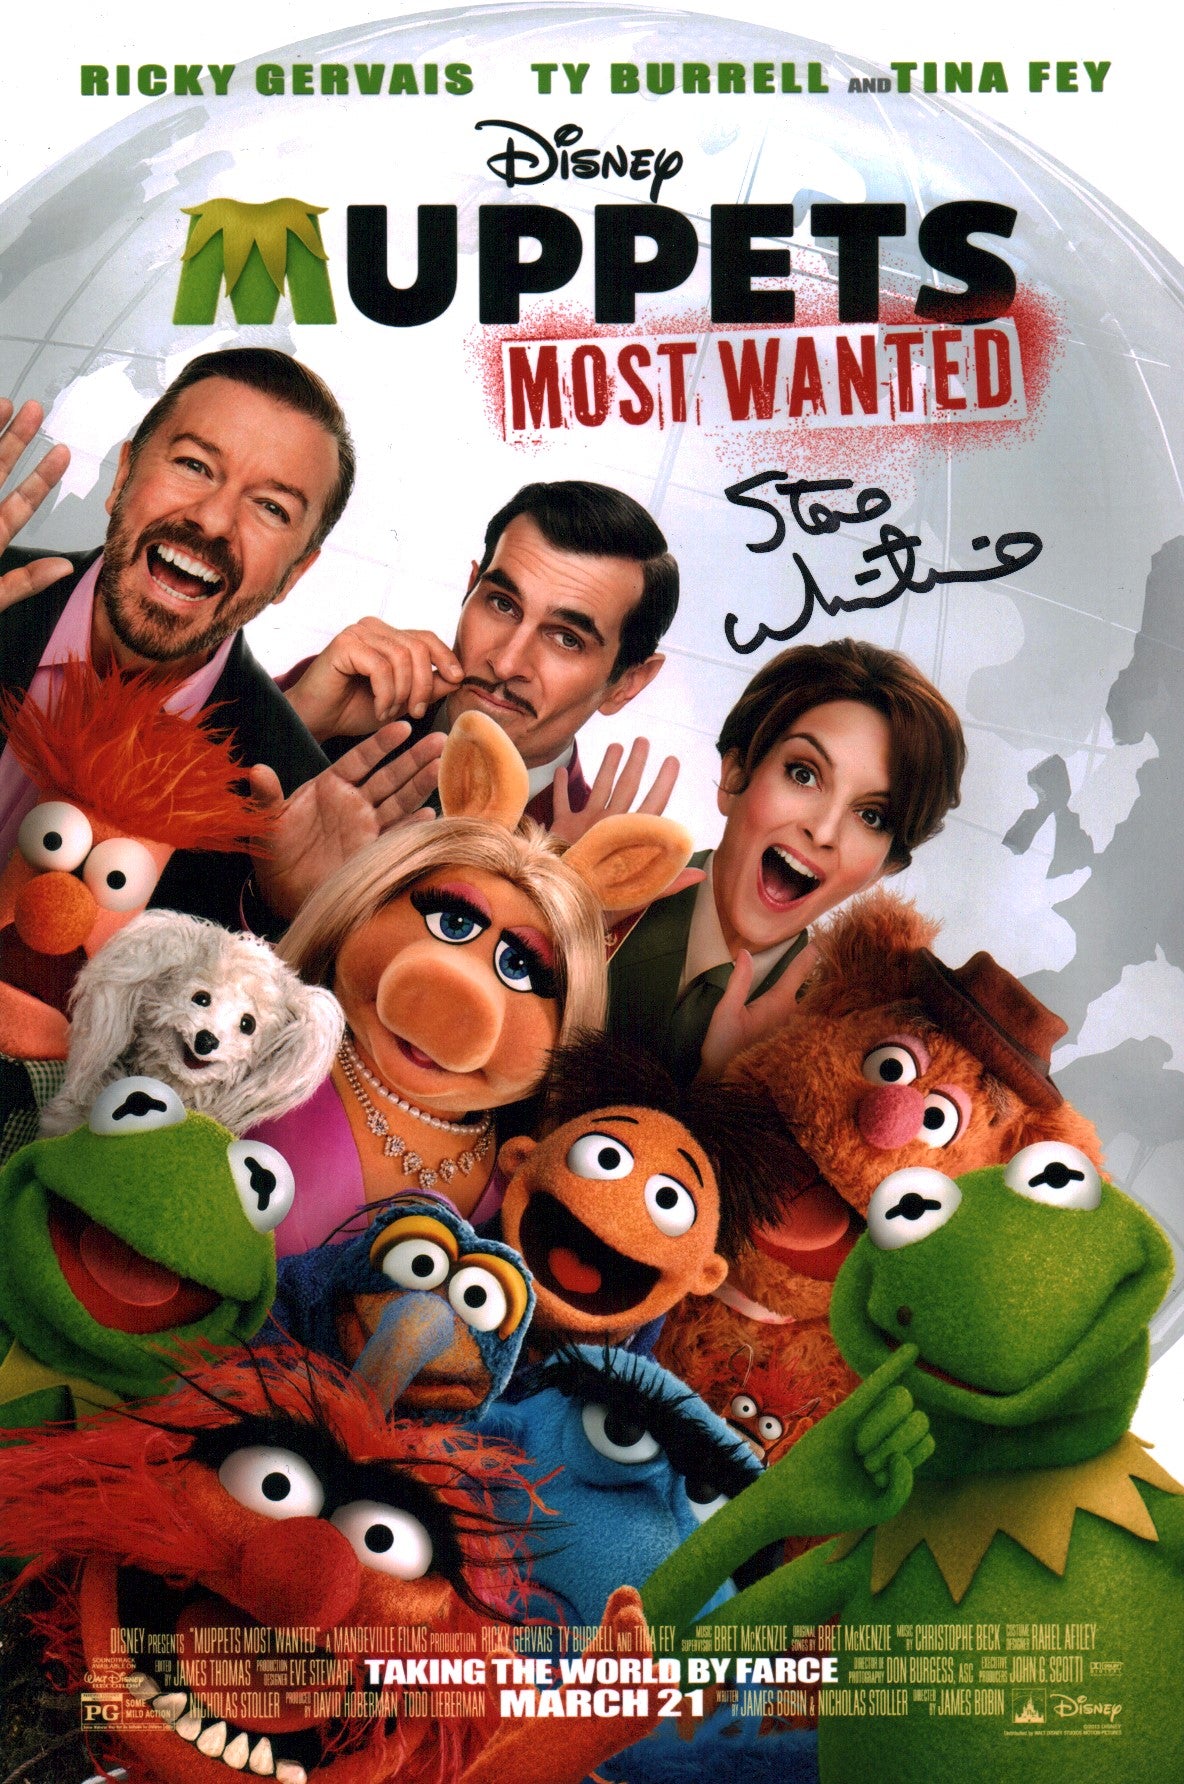 Steve Whitmire Muppets Most Wanted 8x12 Signed Photo JSA Certified Autograph GalaxyCon